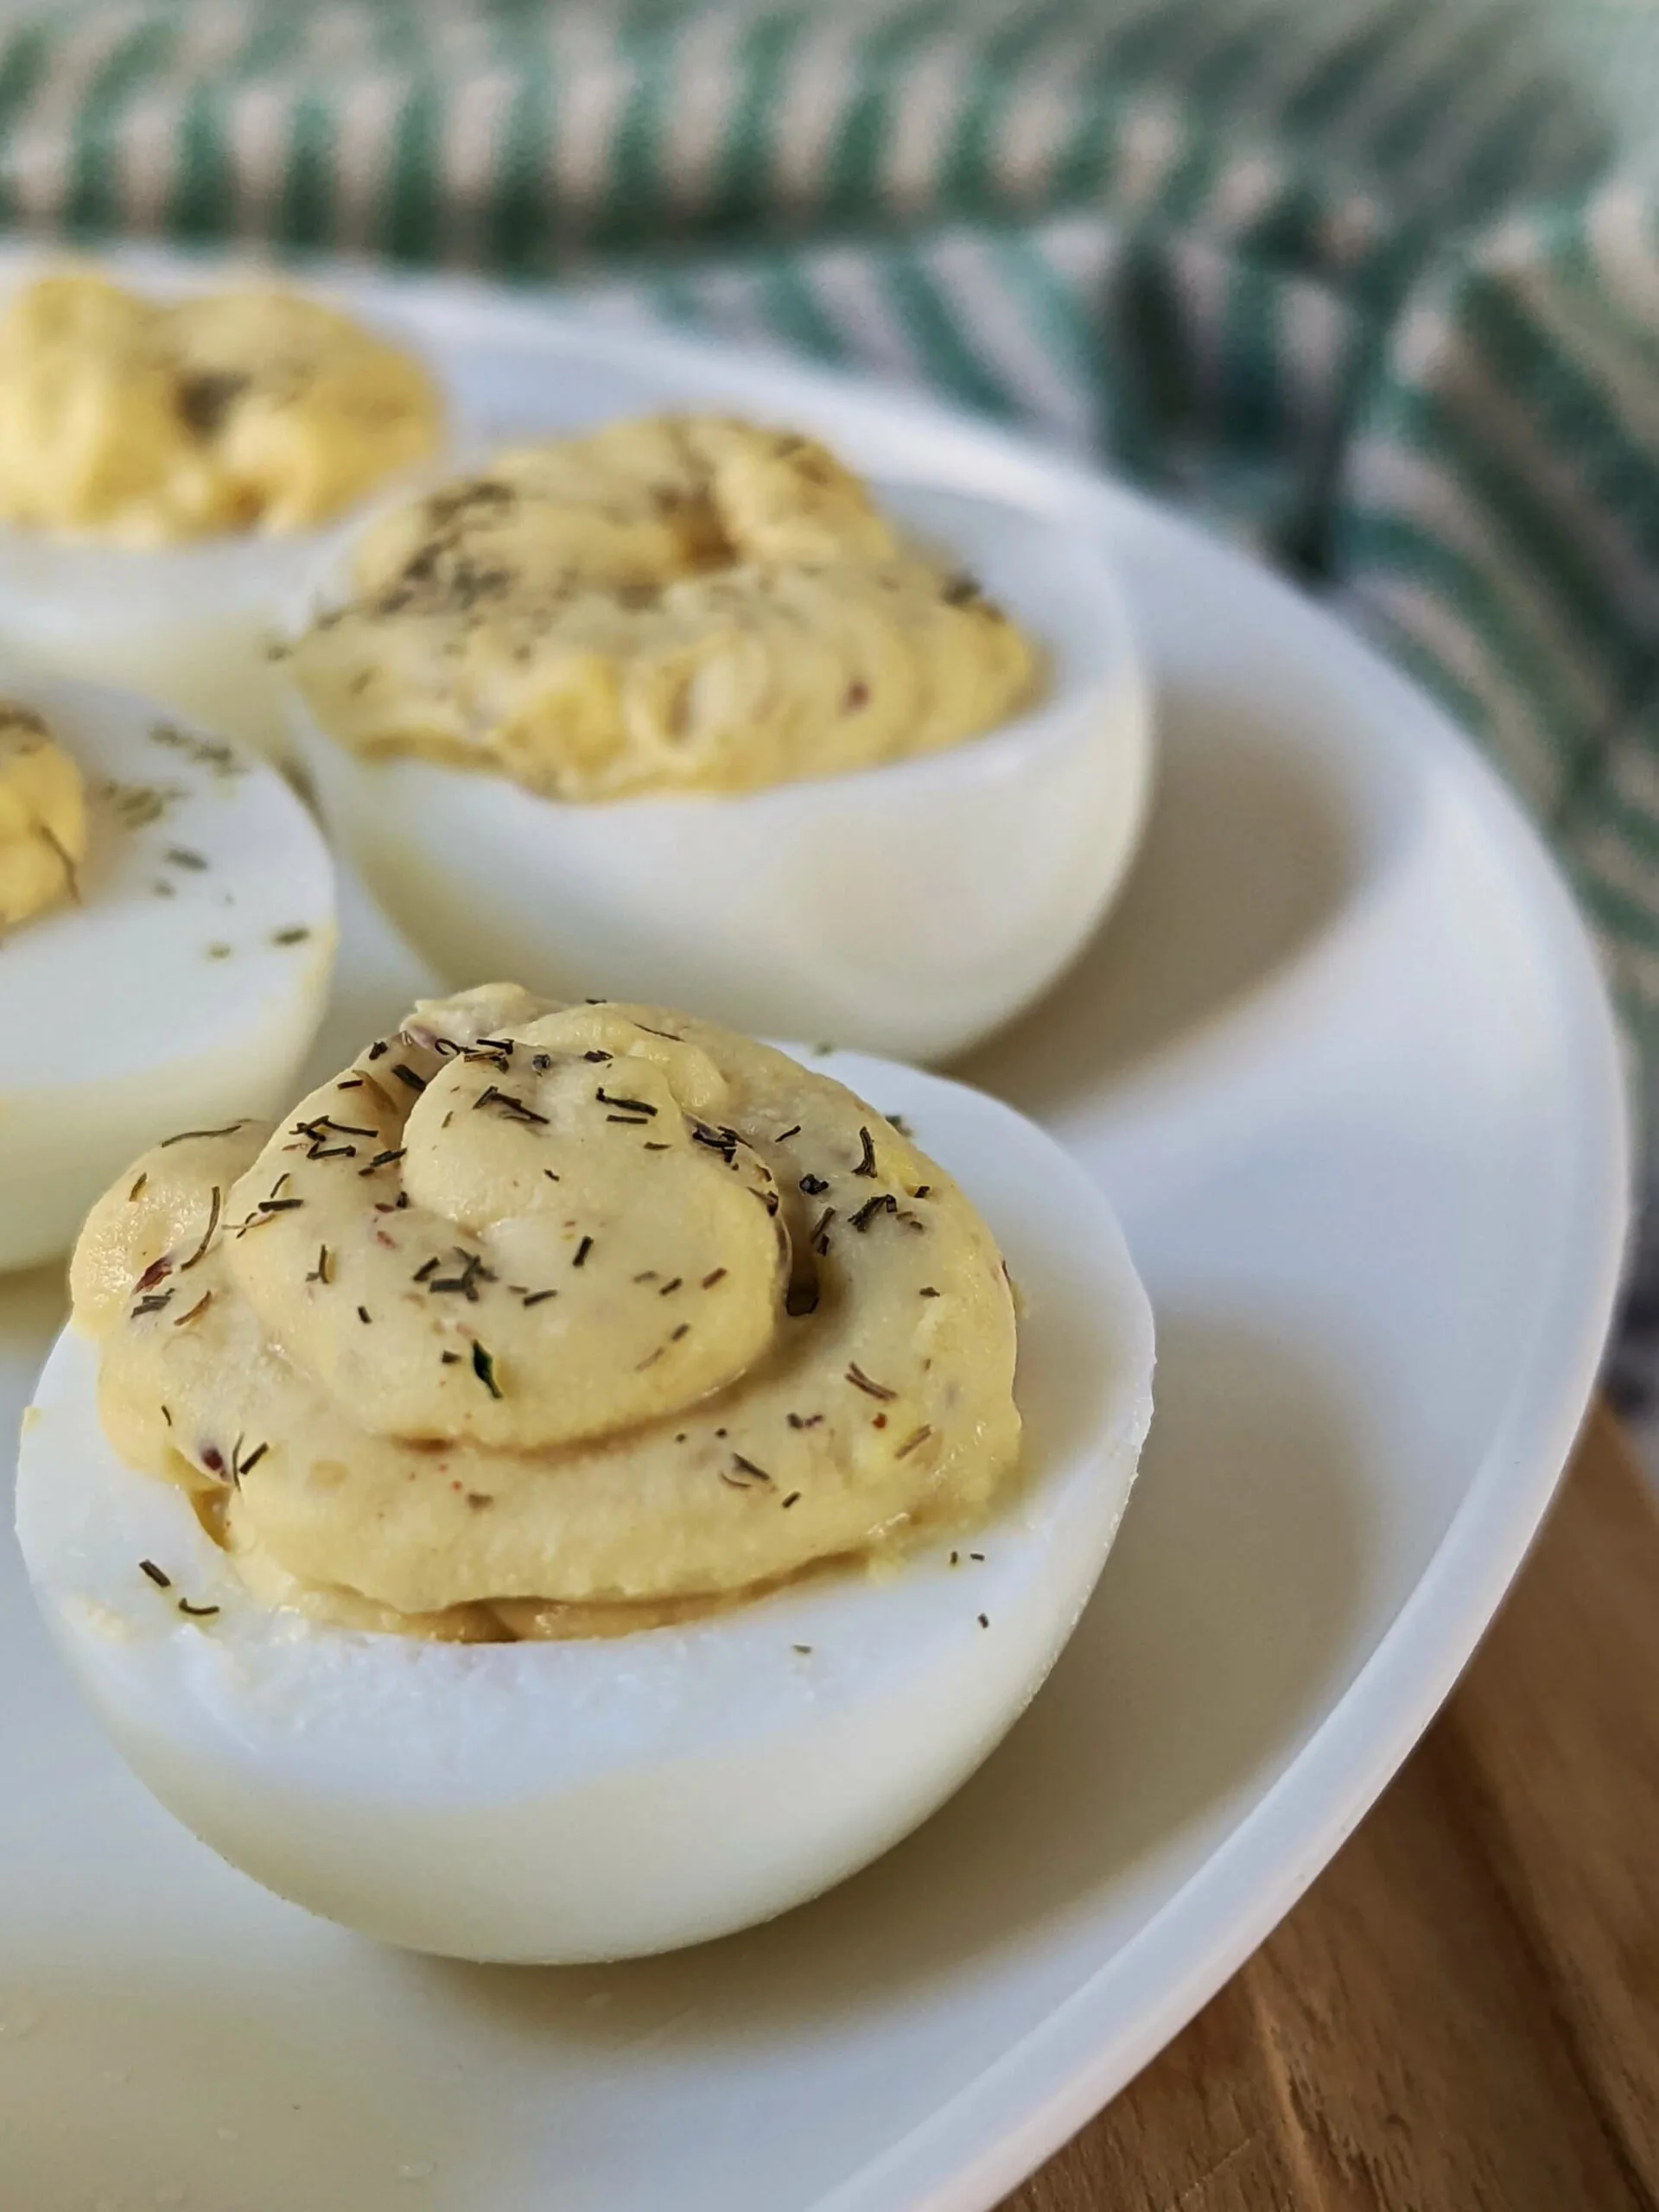 A plate of deviled eggs without vinegar.